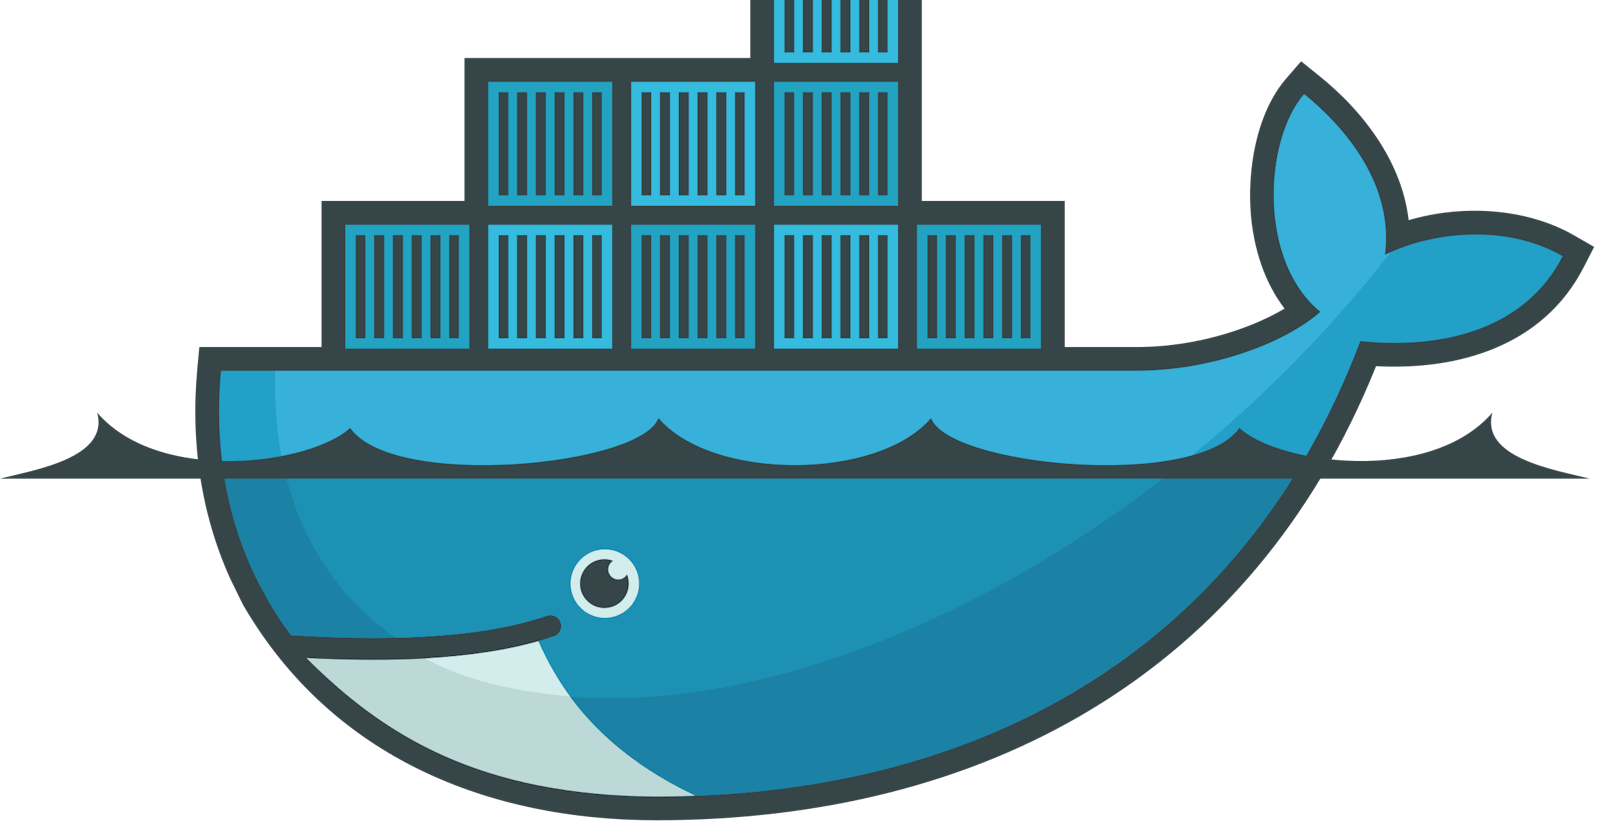 How to Create a Docker Image for Your Bash Script: A Step-by-Step Guide